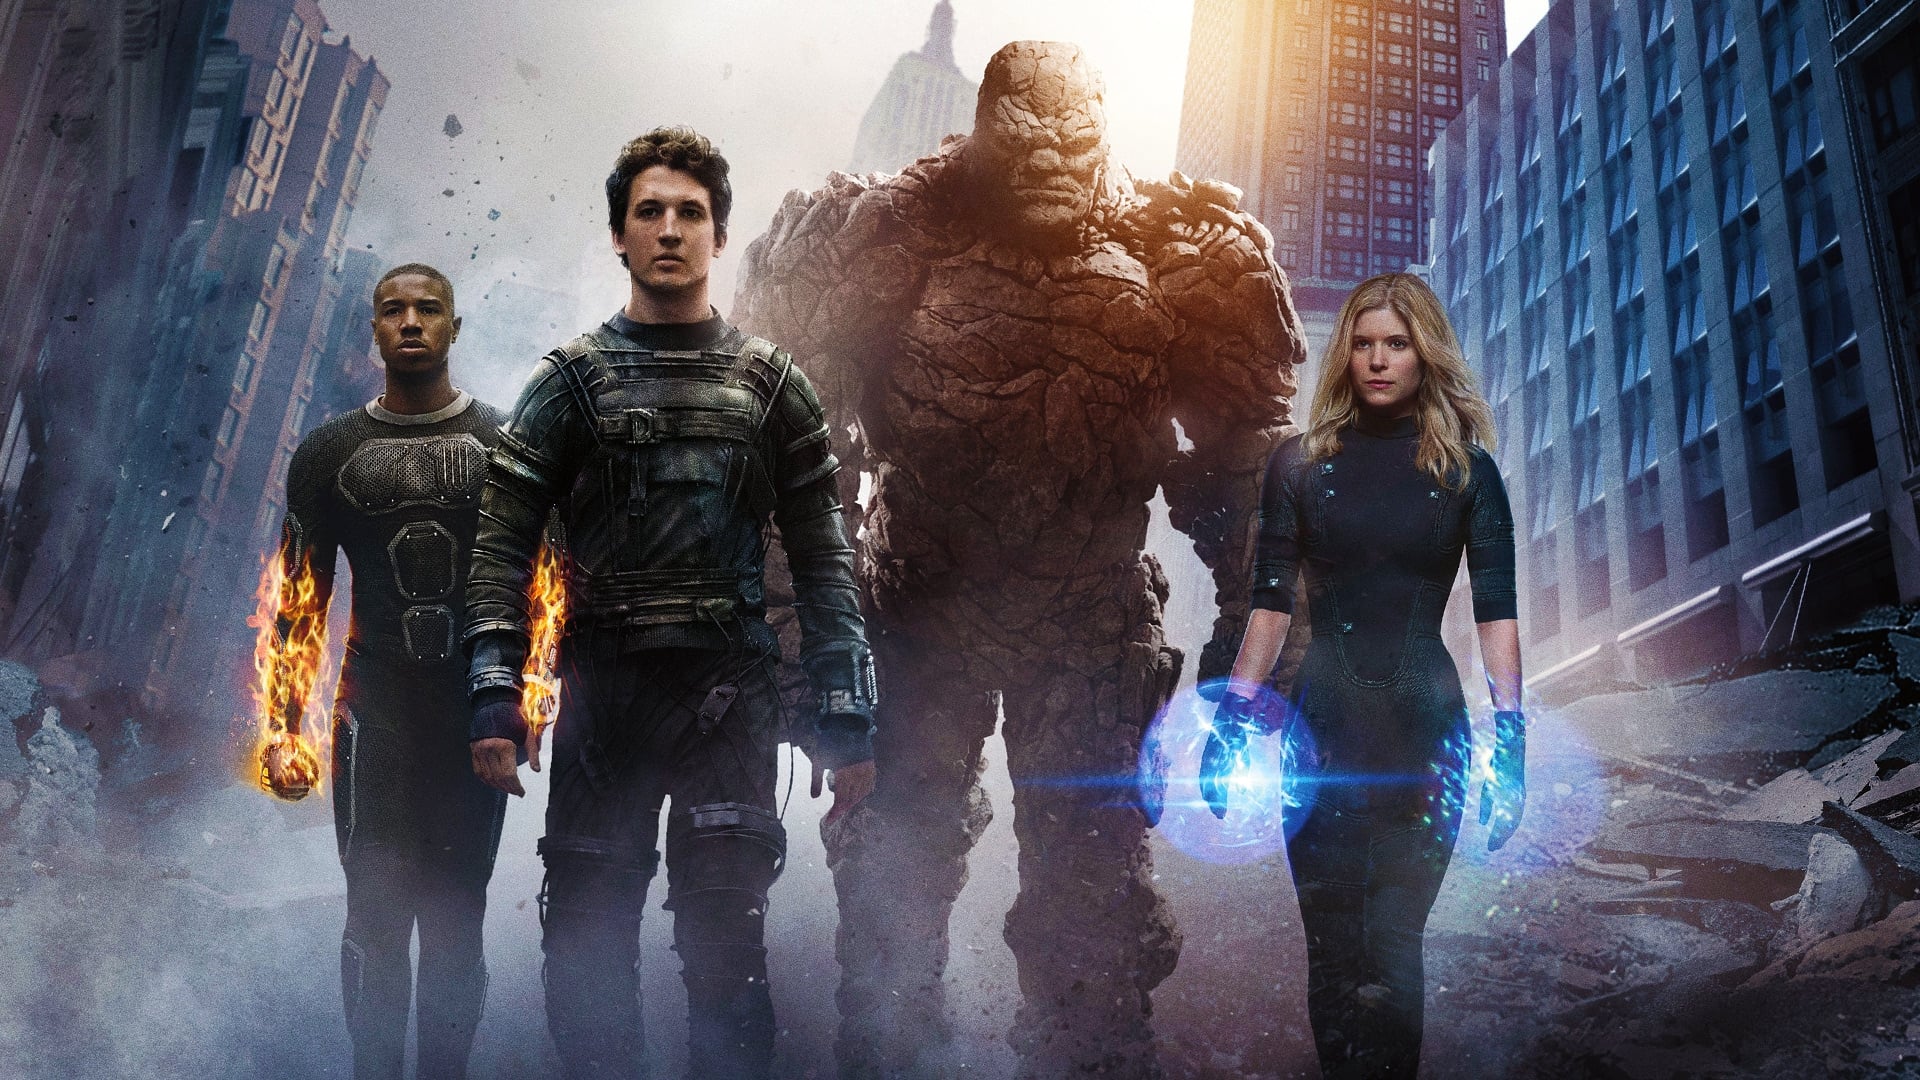 A setback for the new “Fantastic Four”: the director drops out